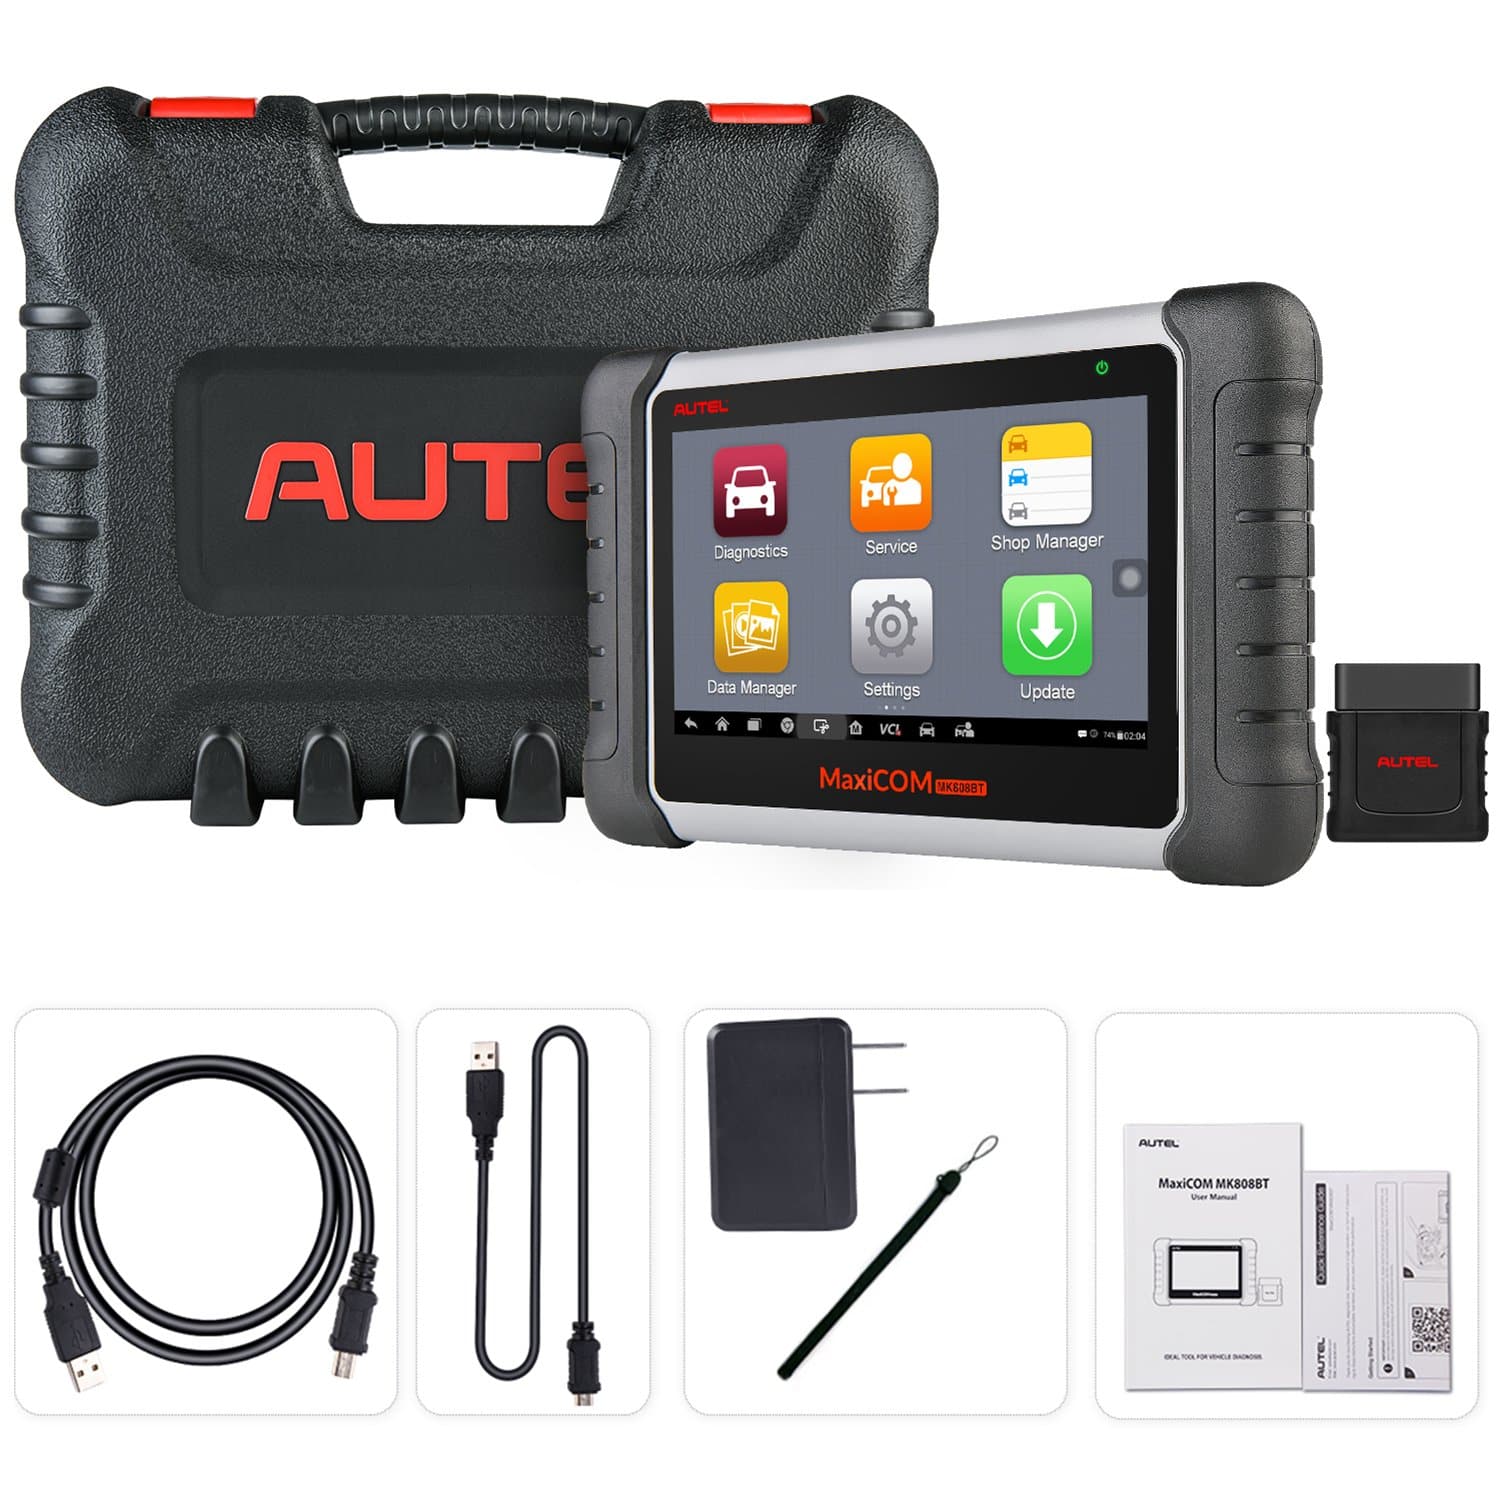 Autel MaxiCOM MK808BT Pro OBD2 Scanner Car Diagnostic Tools Code Reader  With Active Test, All System Diagnosis, 28+Services - AliExpress